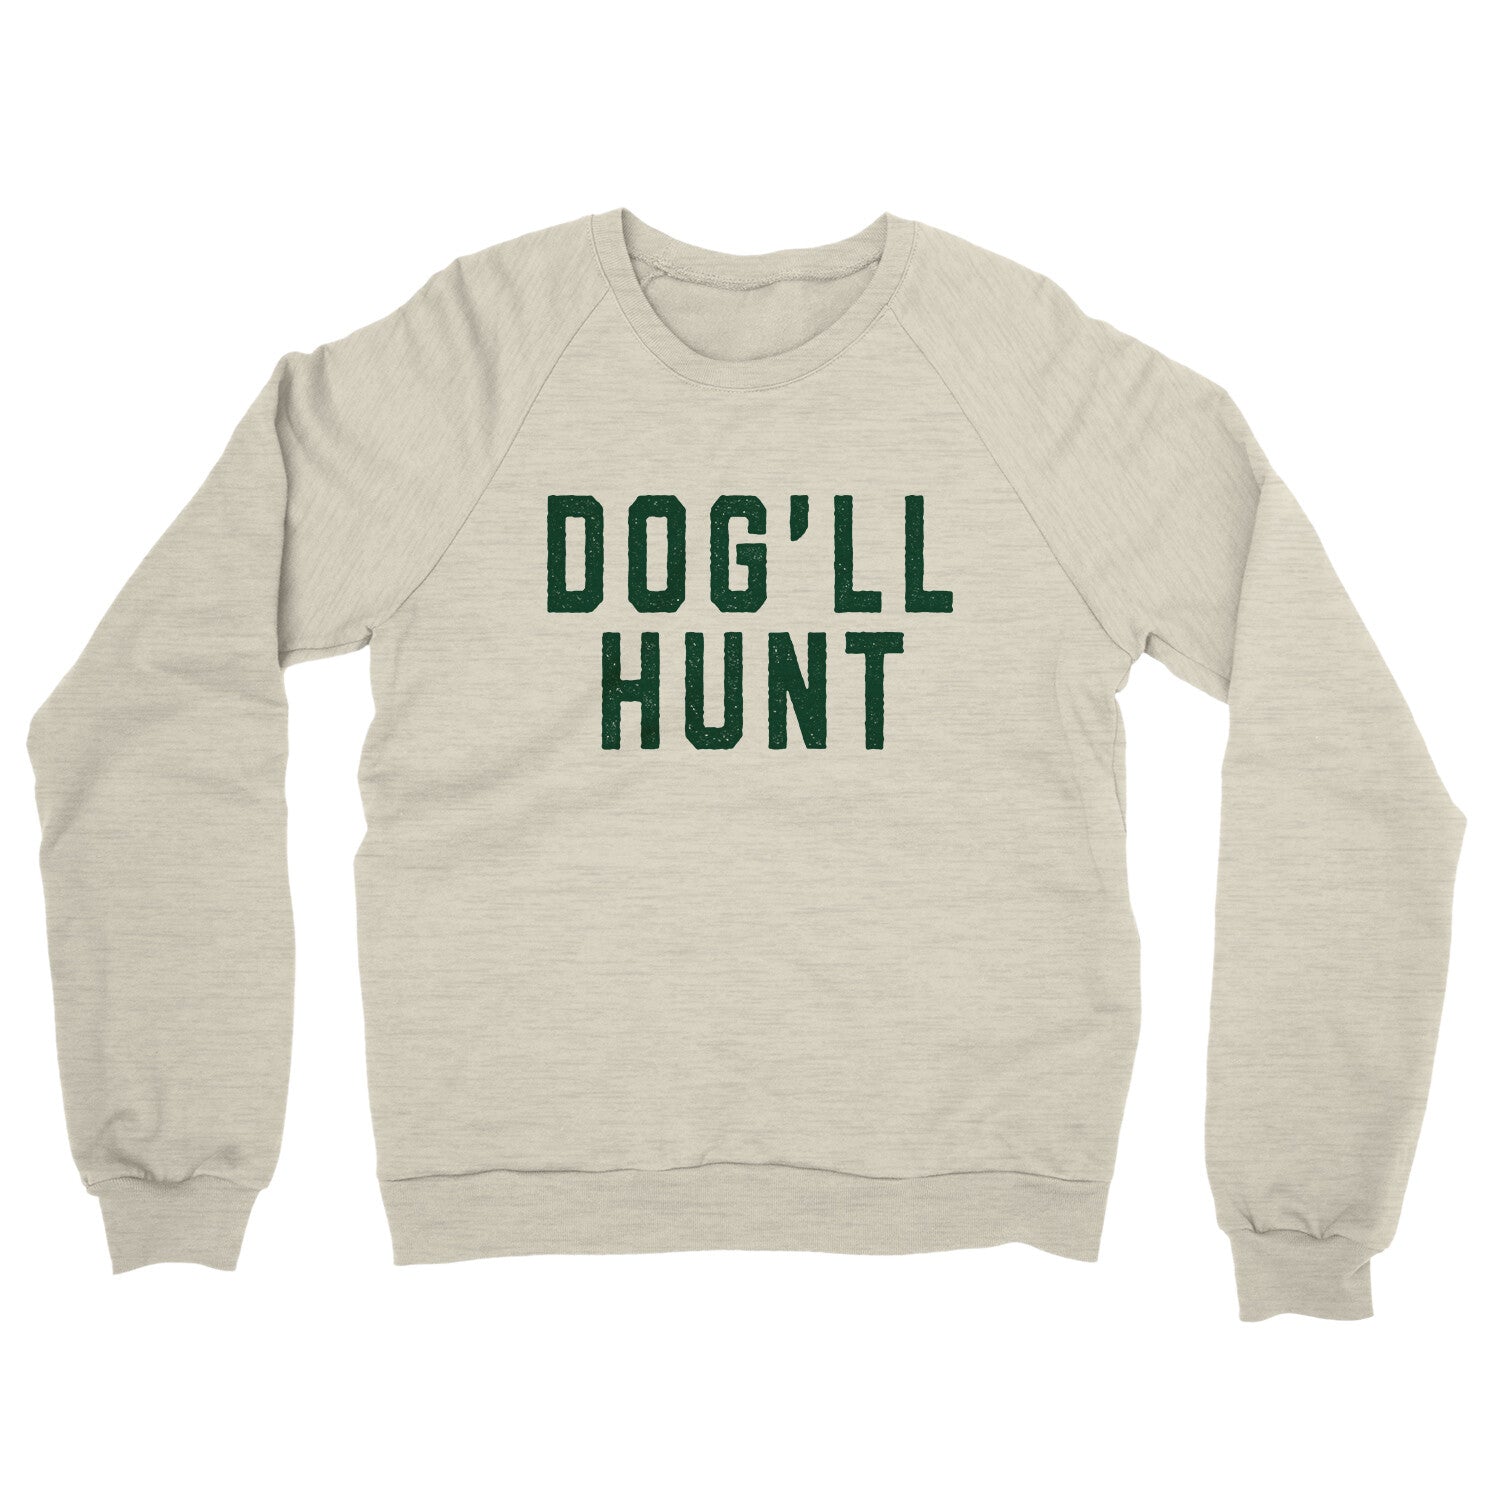 Dog’ll Hunt in Heather Oatmeal Color